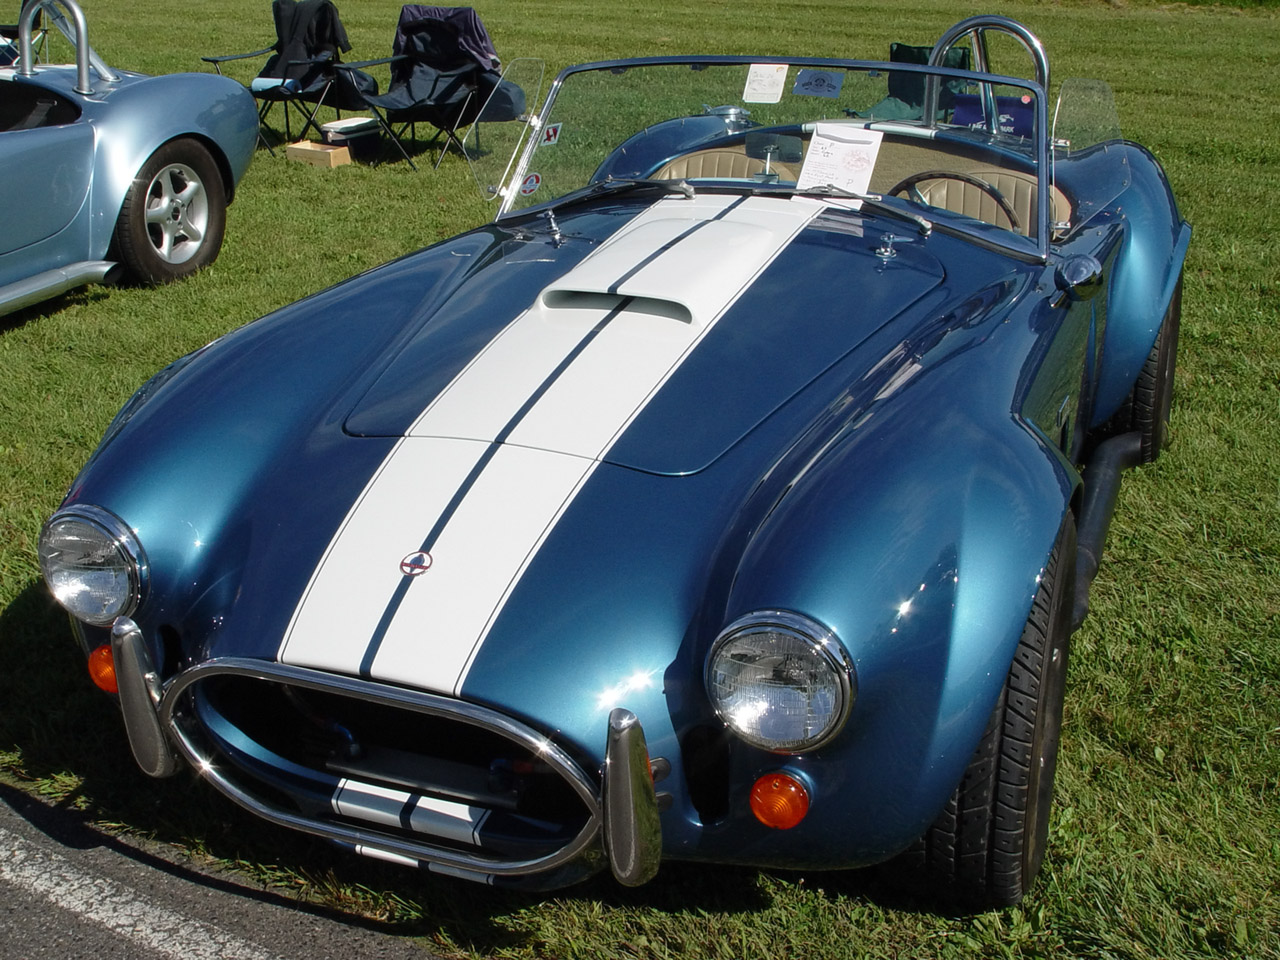 Shelby Cobra 427 - Blue - Front Angle - 1280x960 Wallpaper